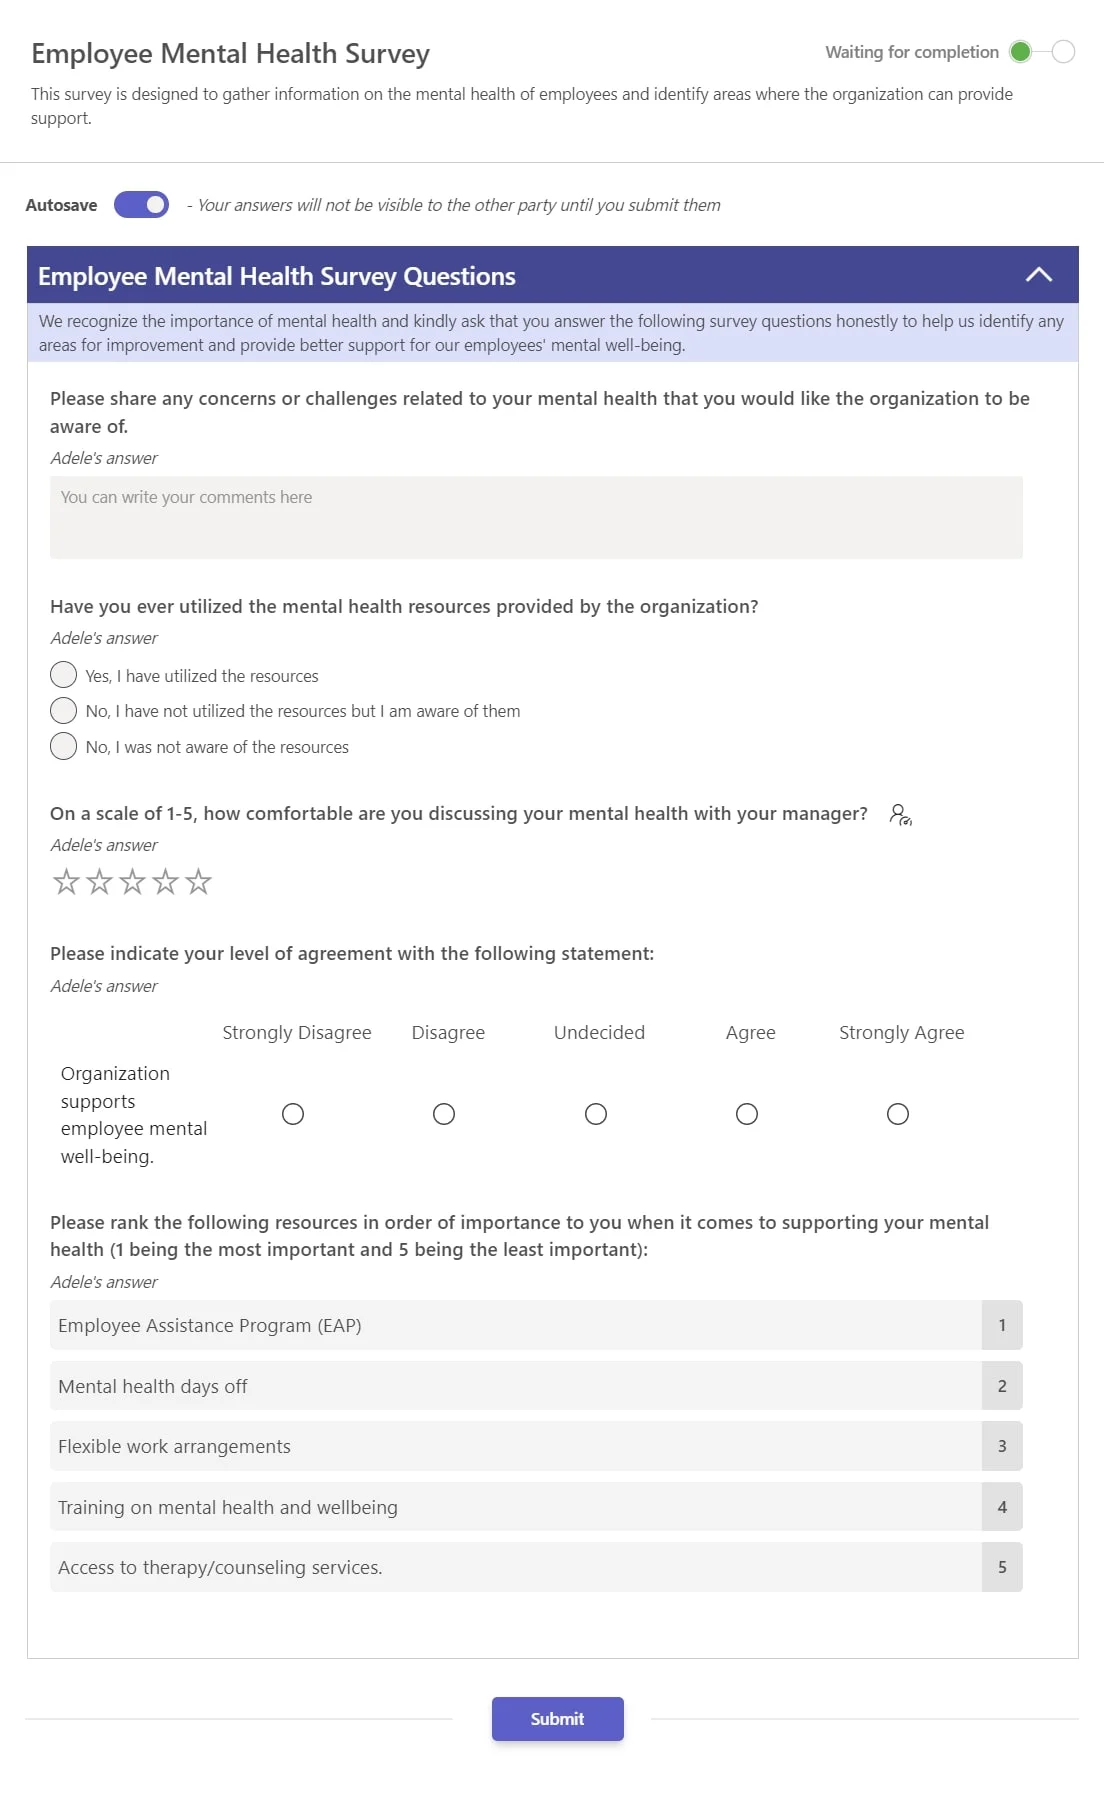 teamflect employee mental health survey template with questions